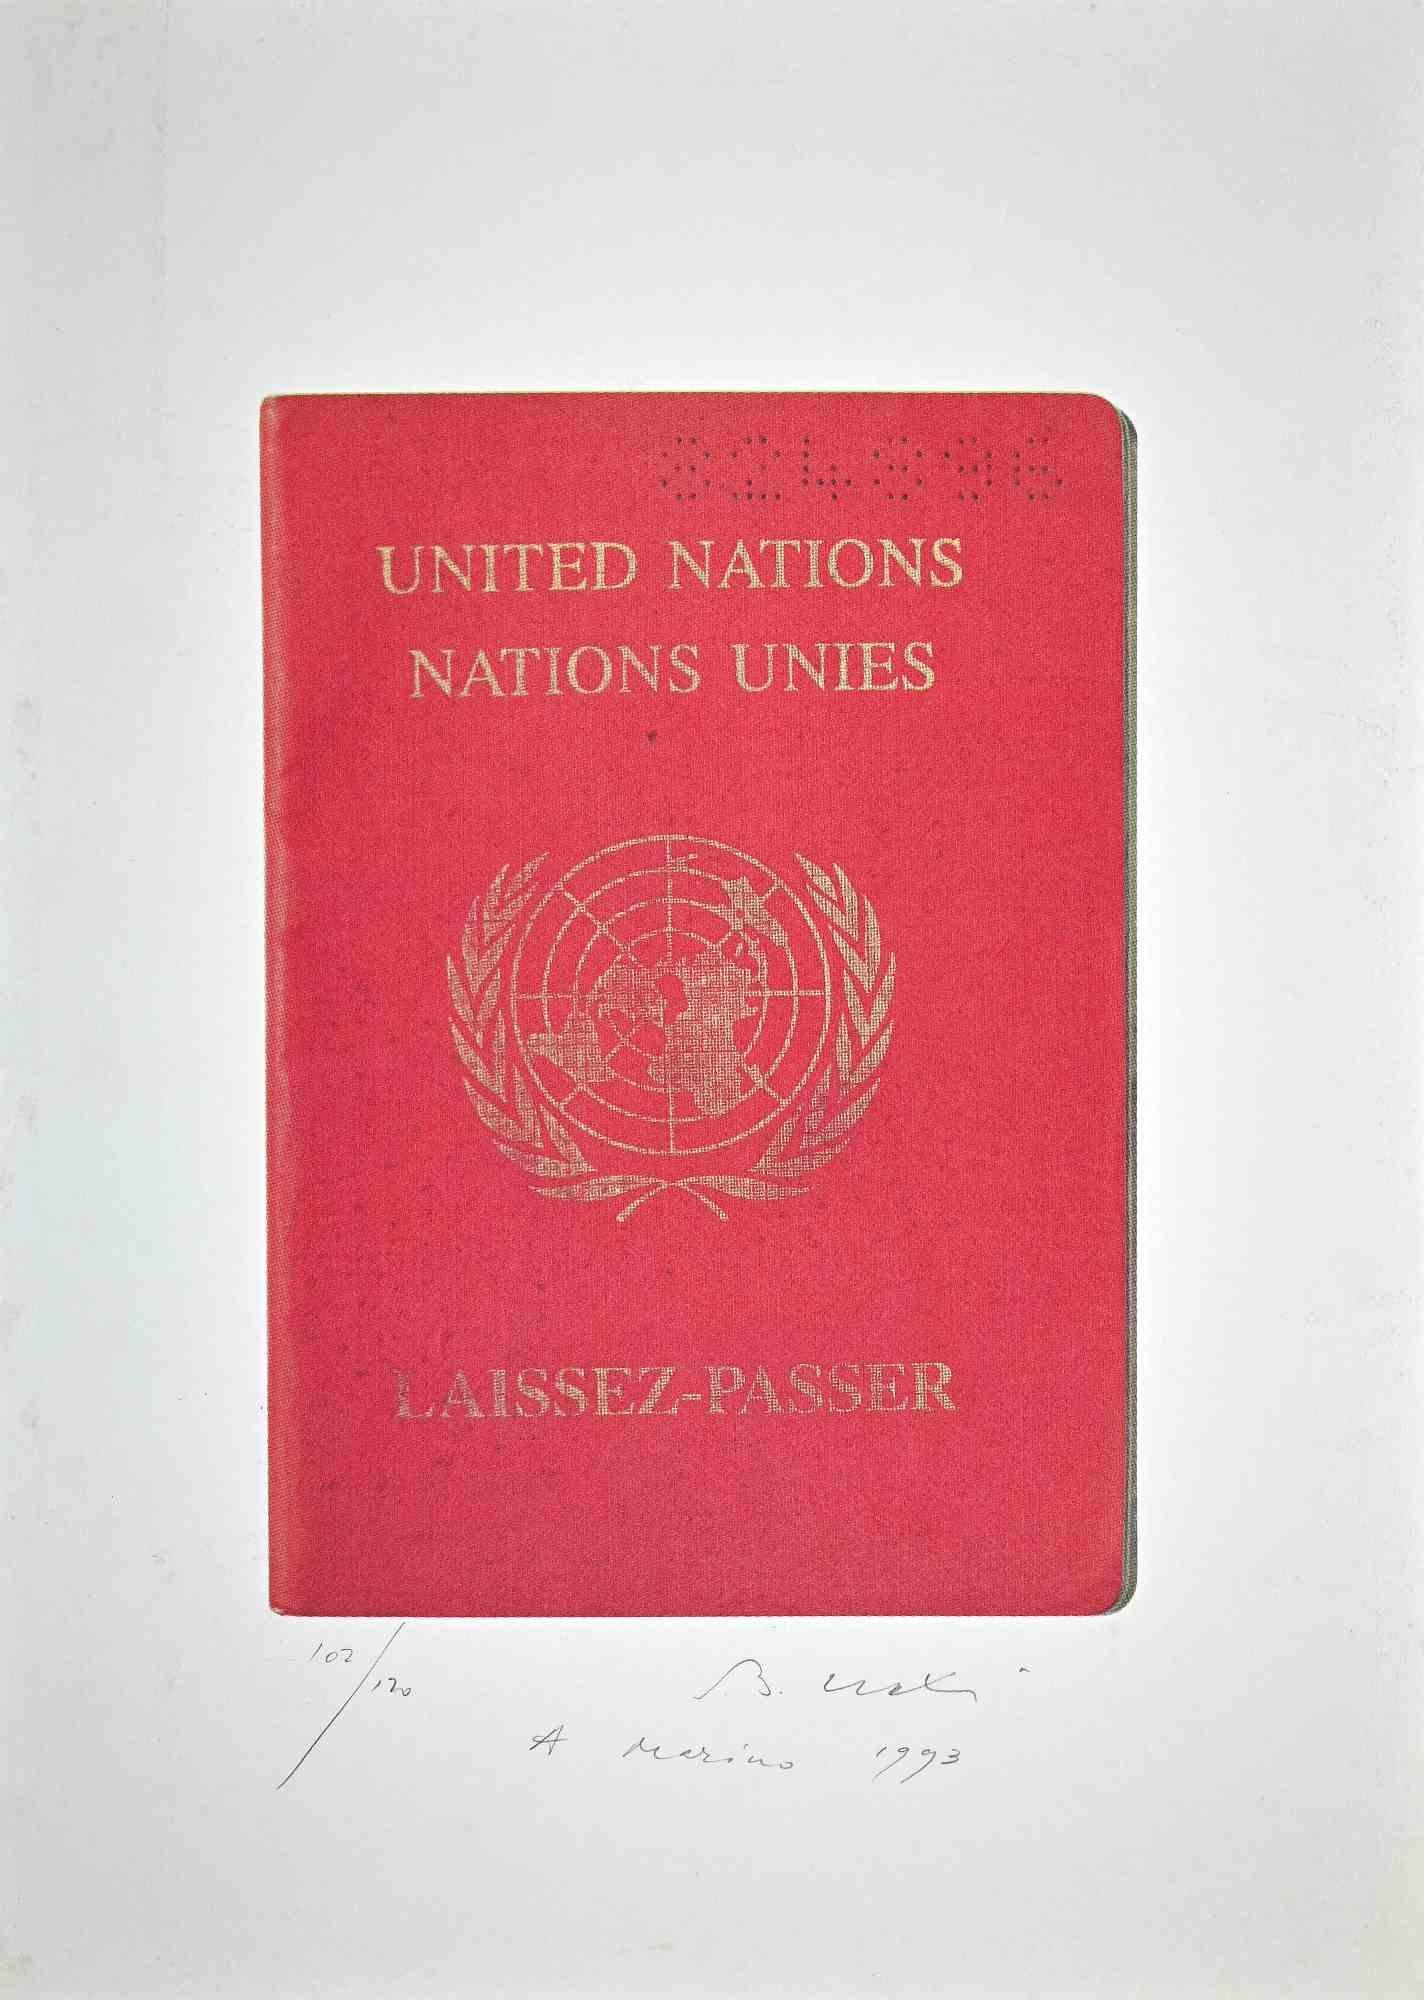 Lithographie des Nations unies - Bettino Craxi - 1994